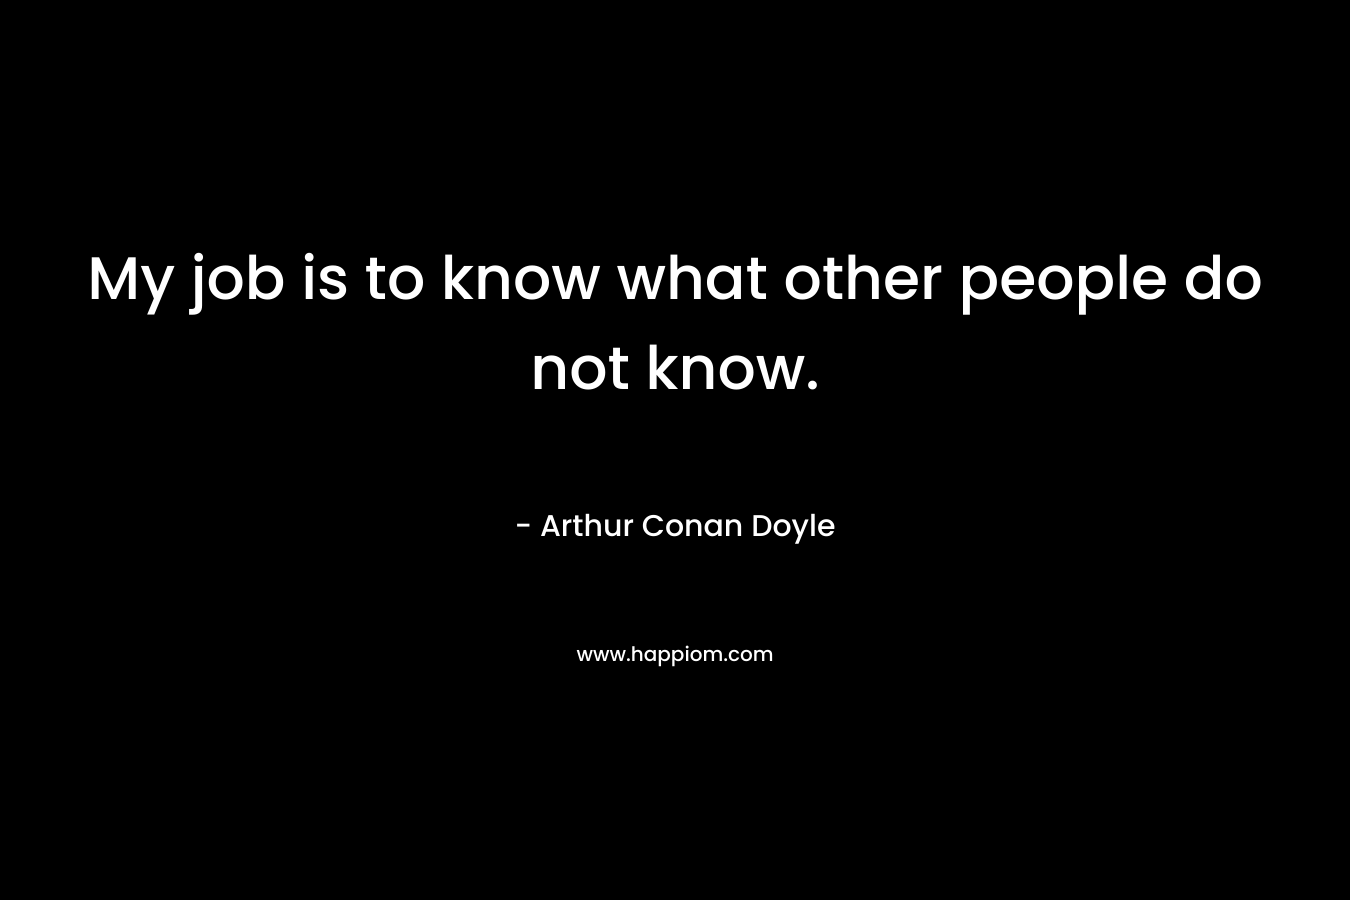 My job is to know what other people do not know.